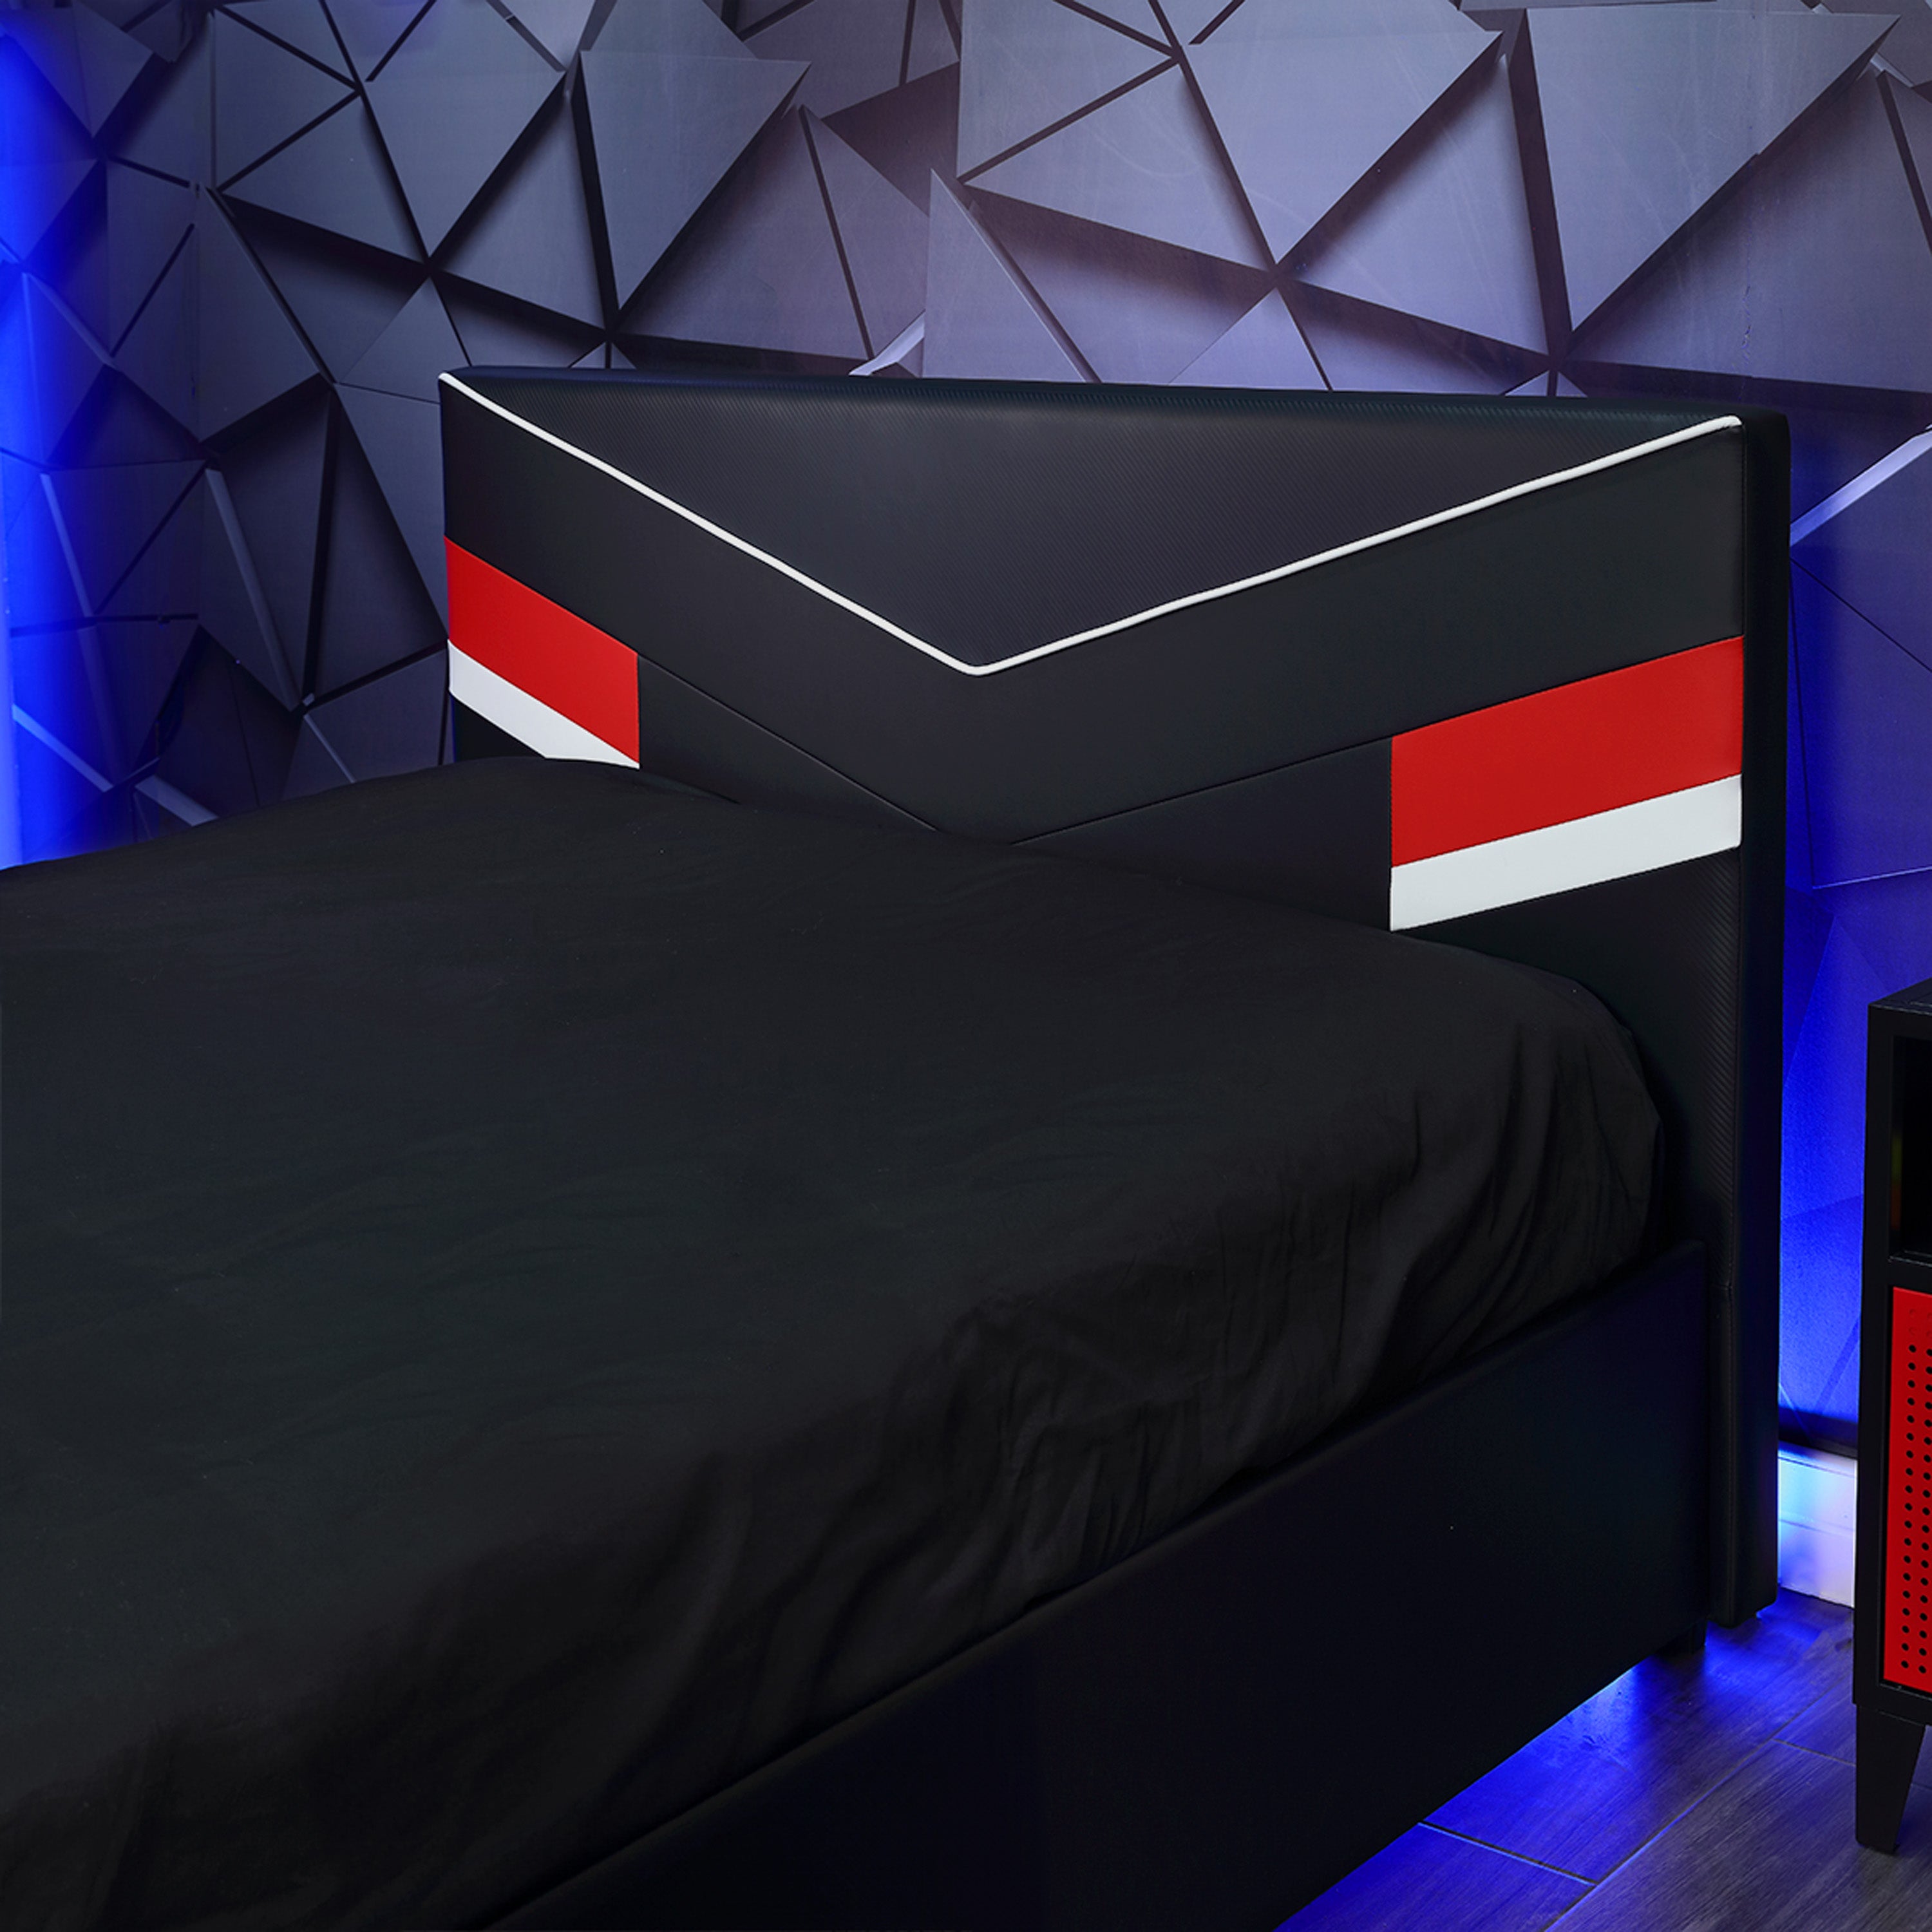 Orion eSports Gaming Bed Frame, Black/Red, Full